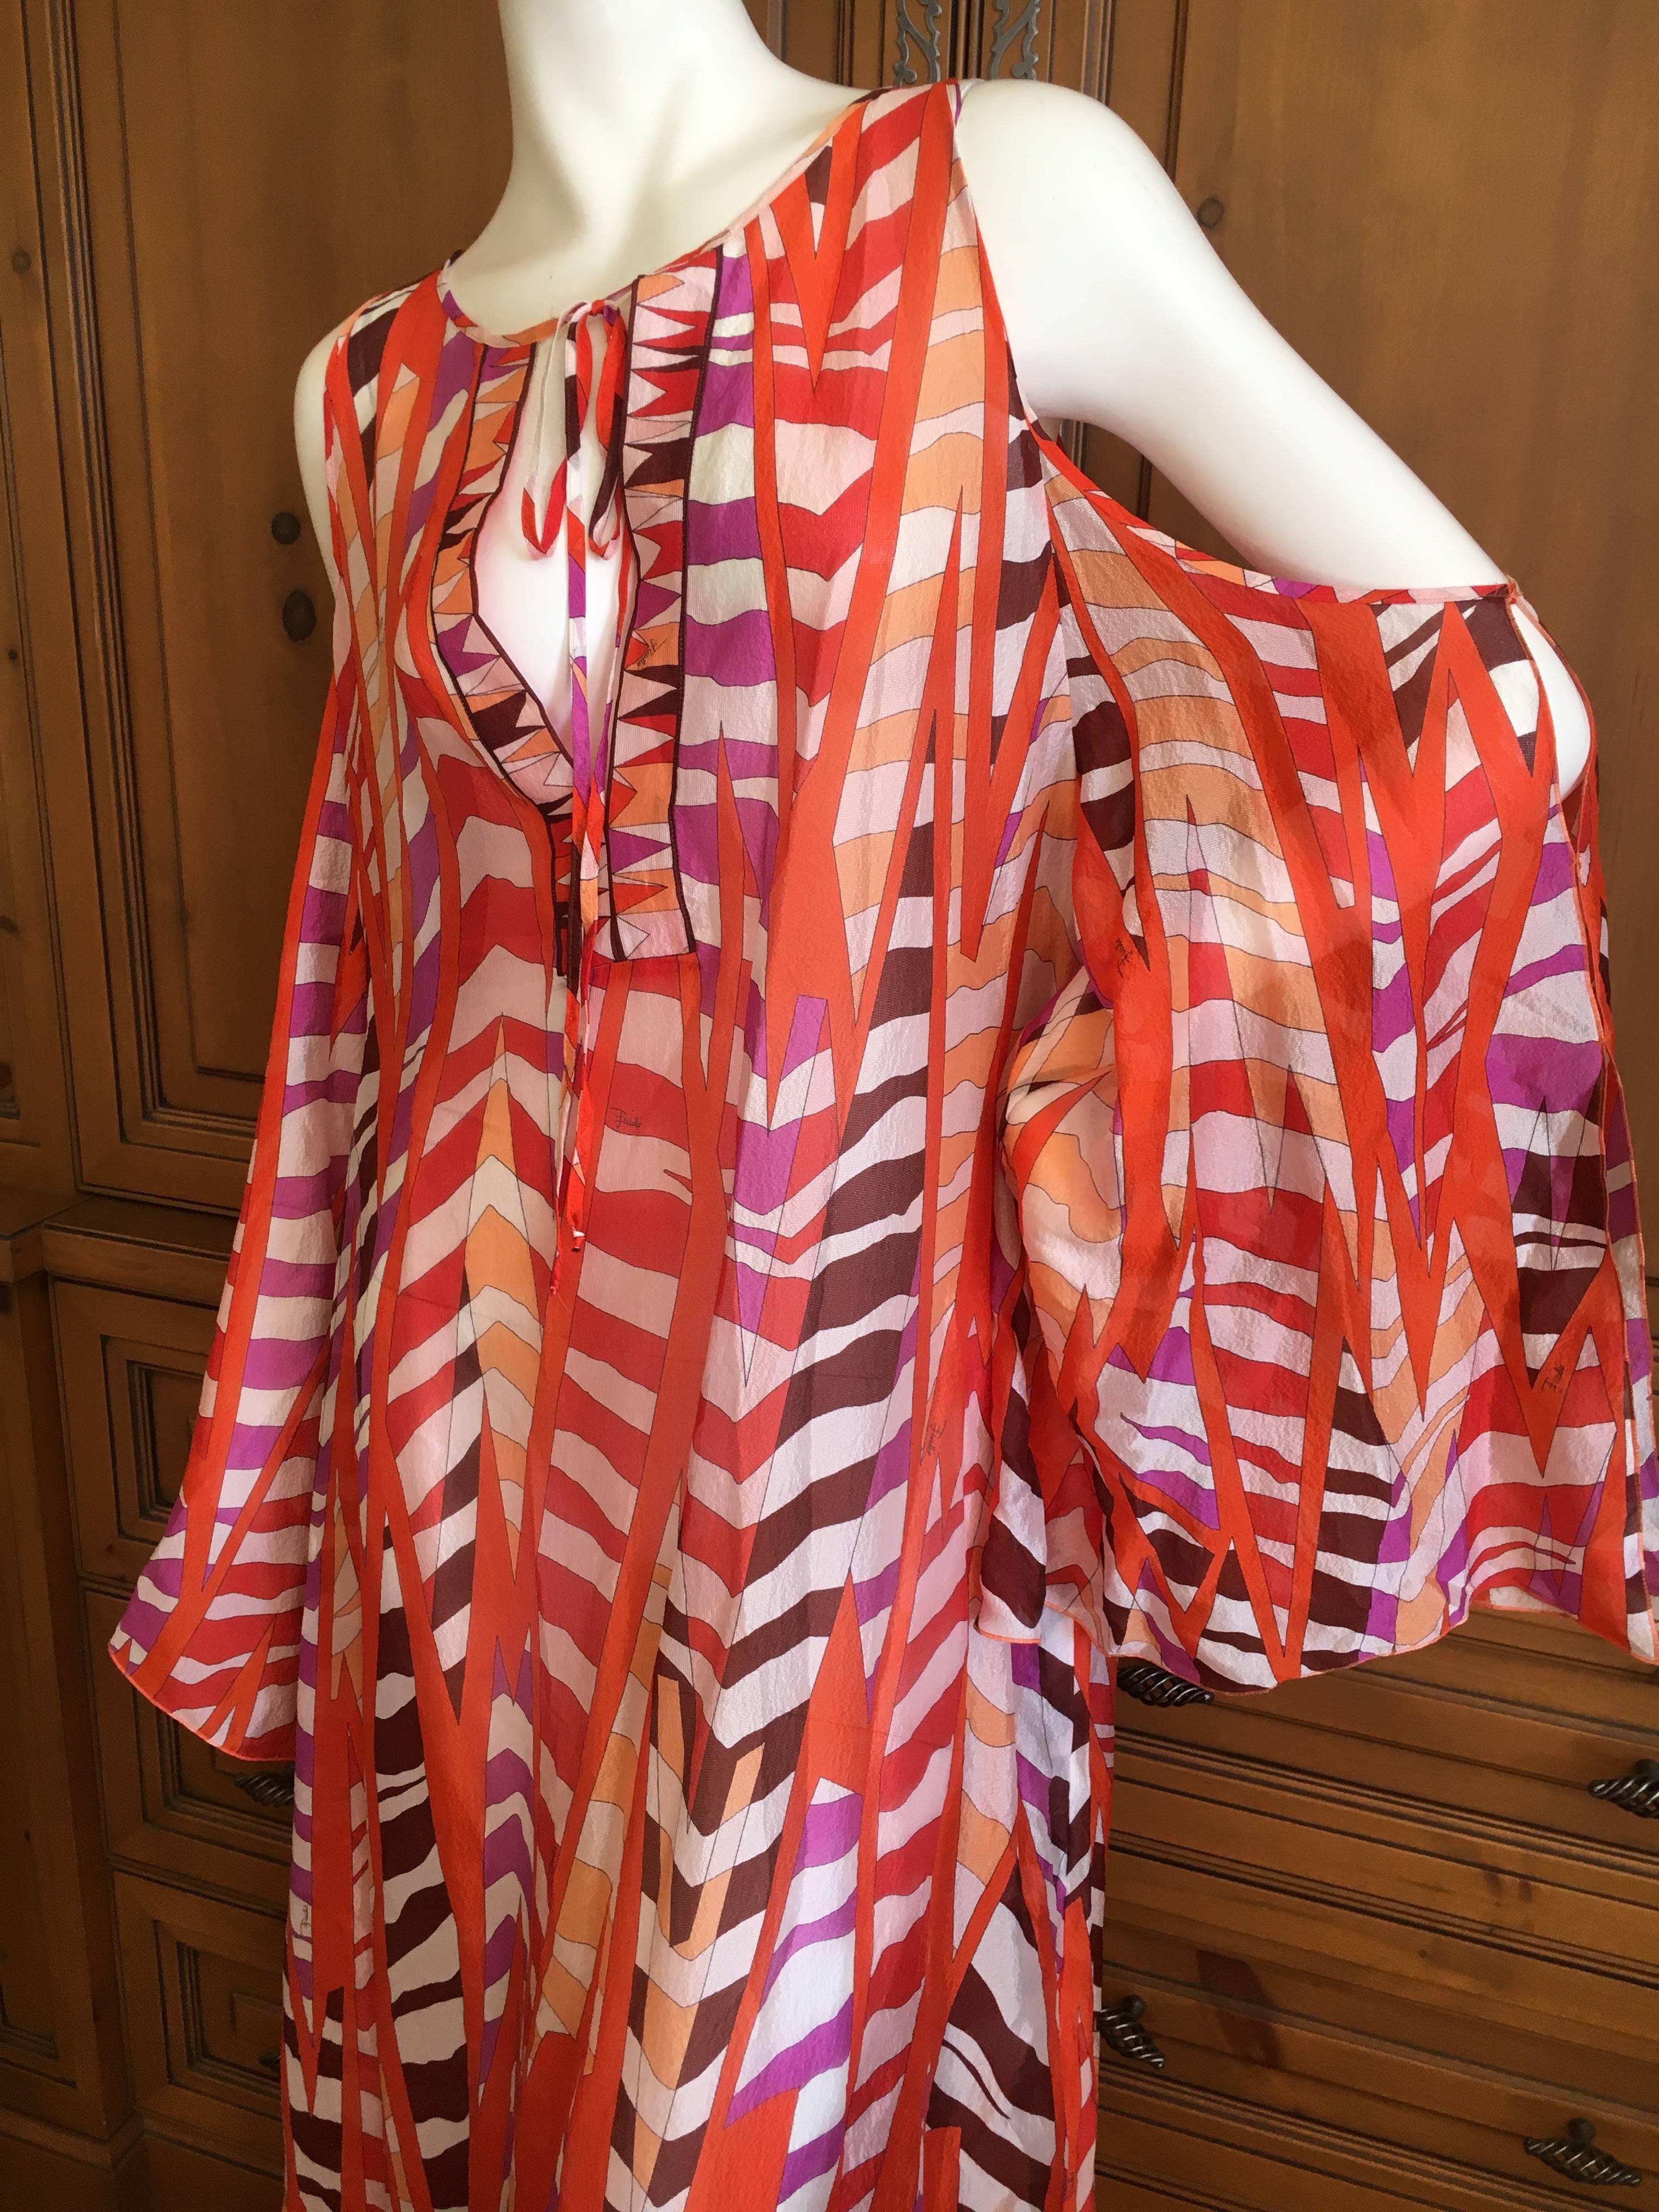 Emilio Pucci Sheer Patterned Caftan with Cold Shoulder cut outs.
 New with Tags.
Exquisite sheer silk cotton blend patterned caftan from Emilio Pucci.
Brand New , unworn with tags.
Perfect for Pool or Beach cover up.
Marked size 40, seems to run